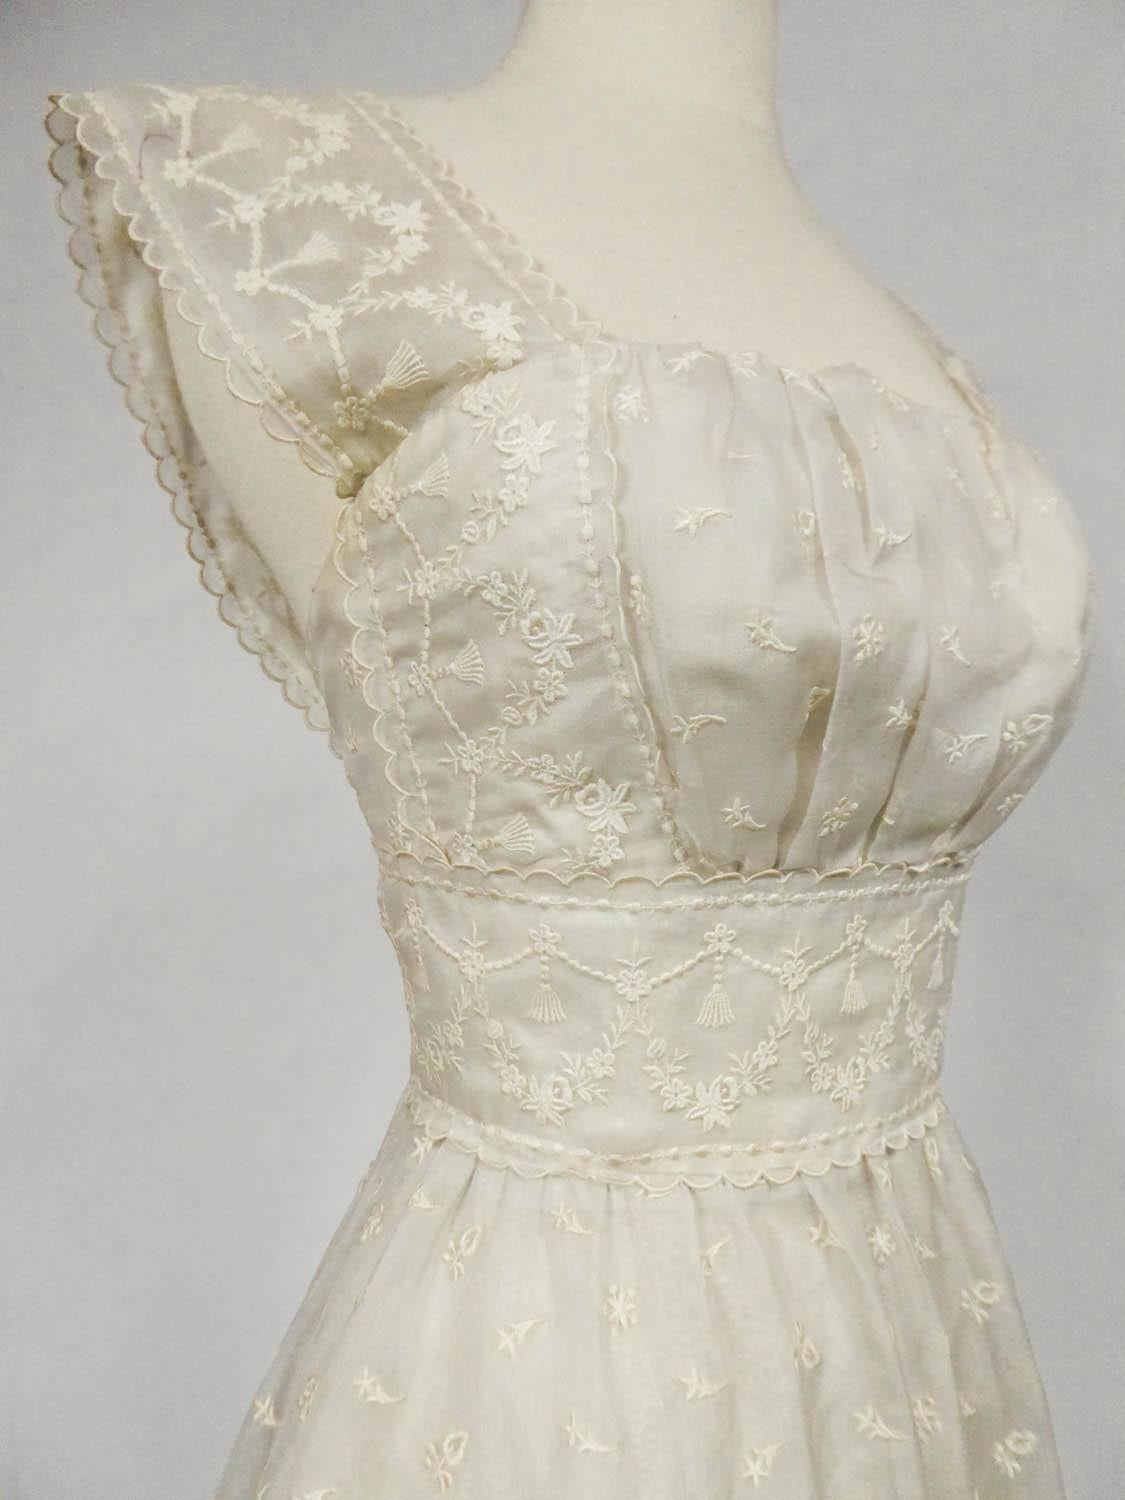 Circa 1957
France

Lanvin Castillo Haute couture ball gown (attributed to) in embroidered cream gazar from the late 1950s. High-waisted dress with square low-cut neckline underlined with gathers and a large matching waistband. Large straps covering